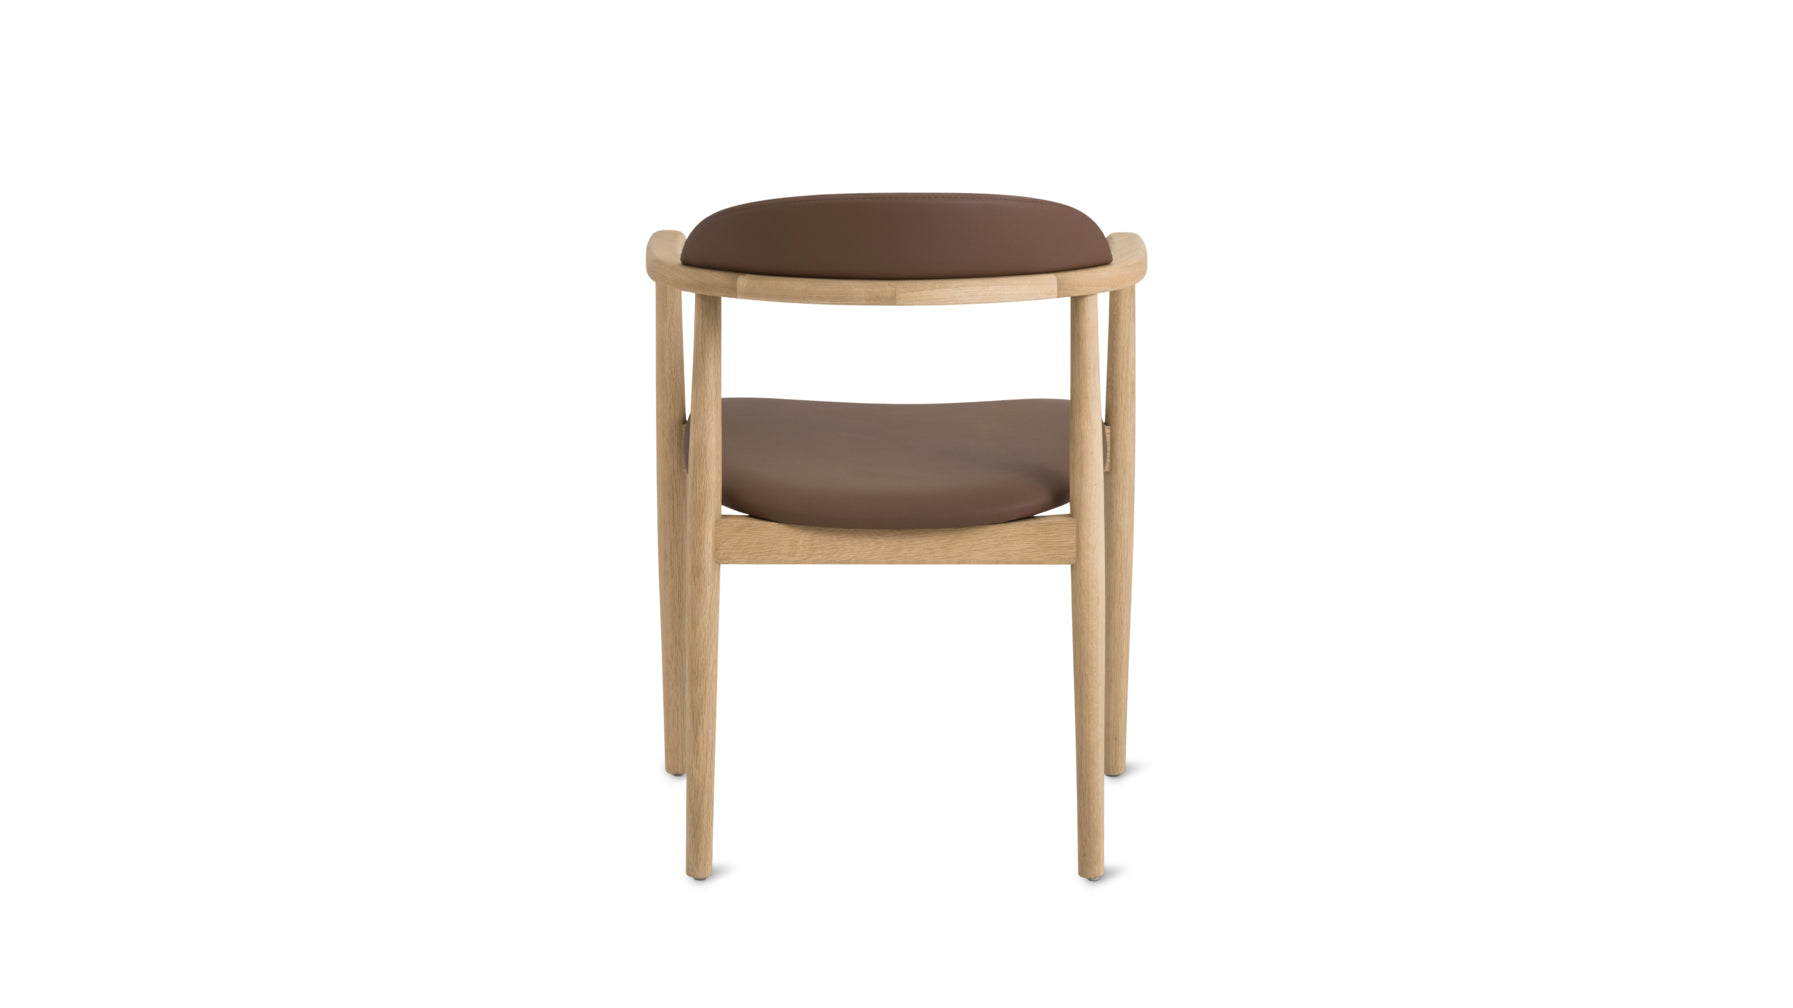 Count On Me Dining Chair, Natural Oak Brown - Image 6